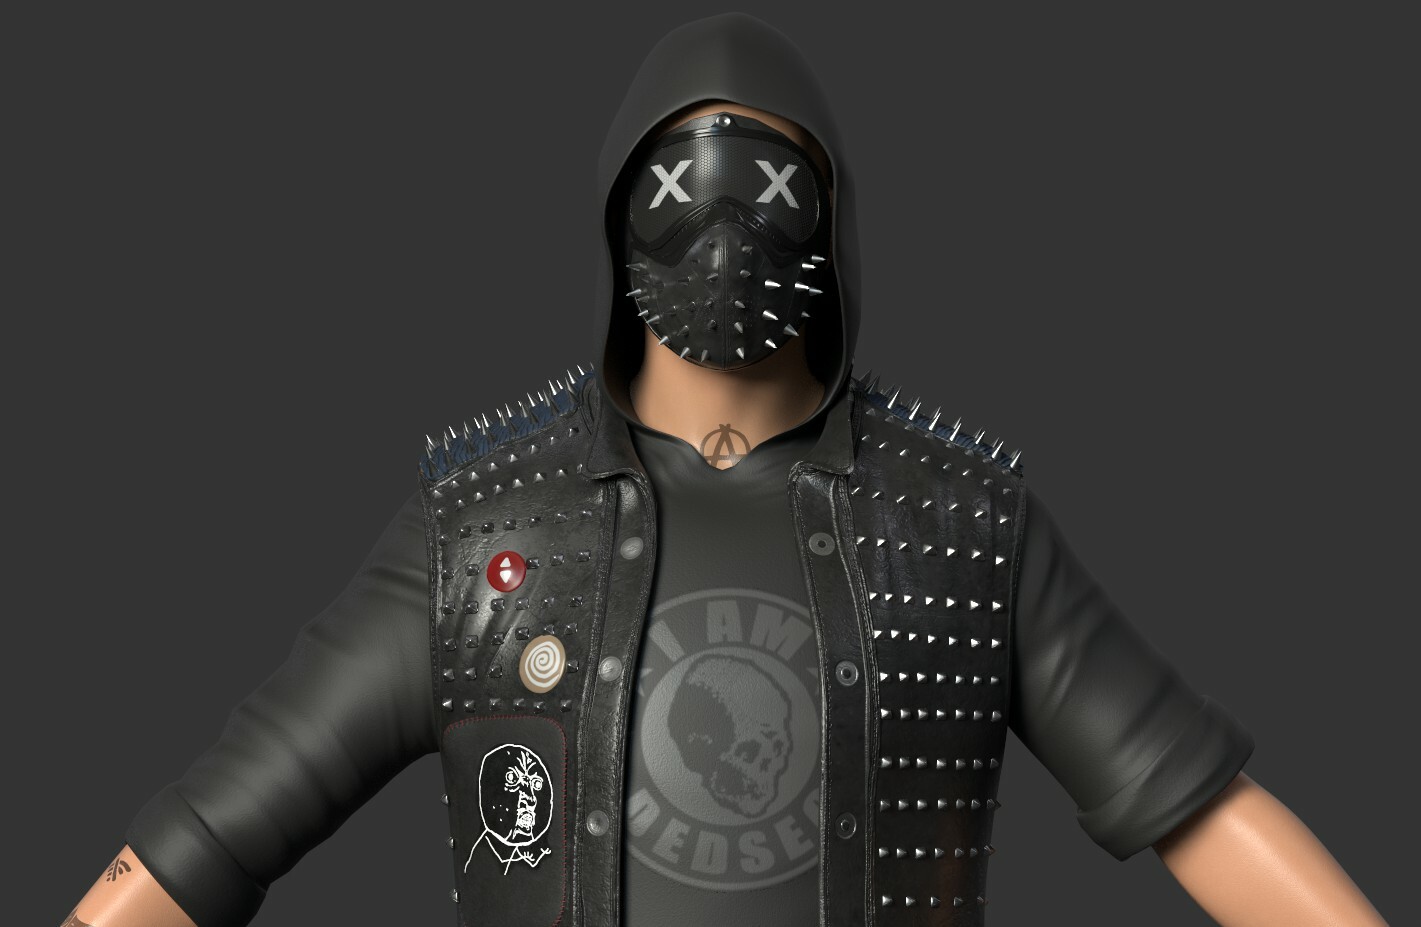 wrench watch dogs 2